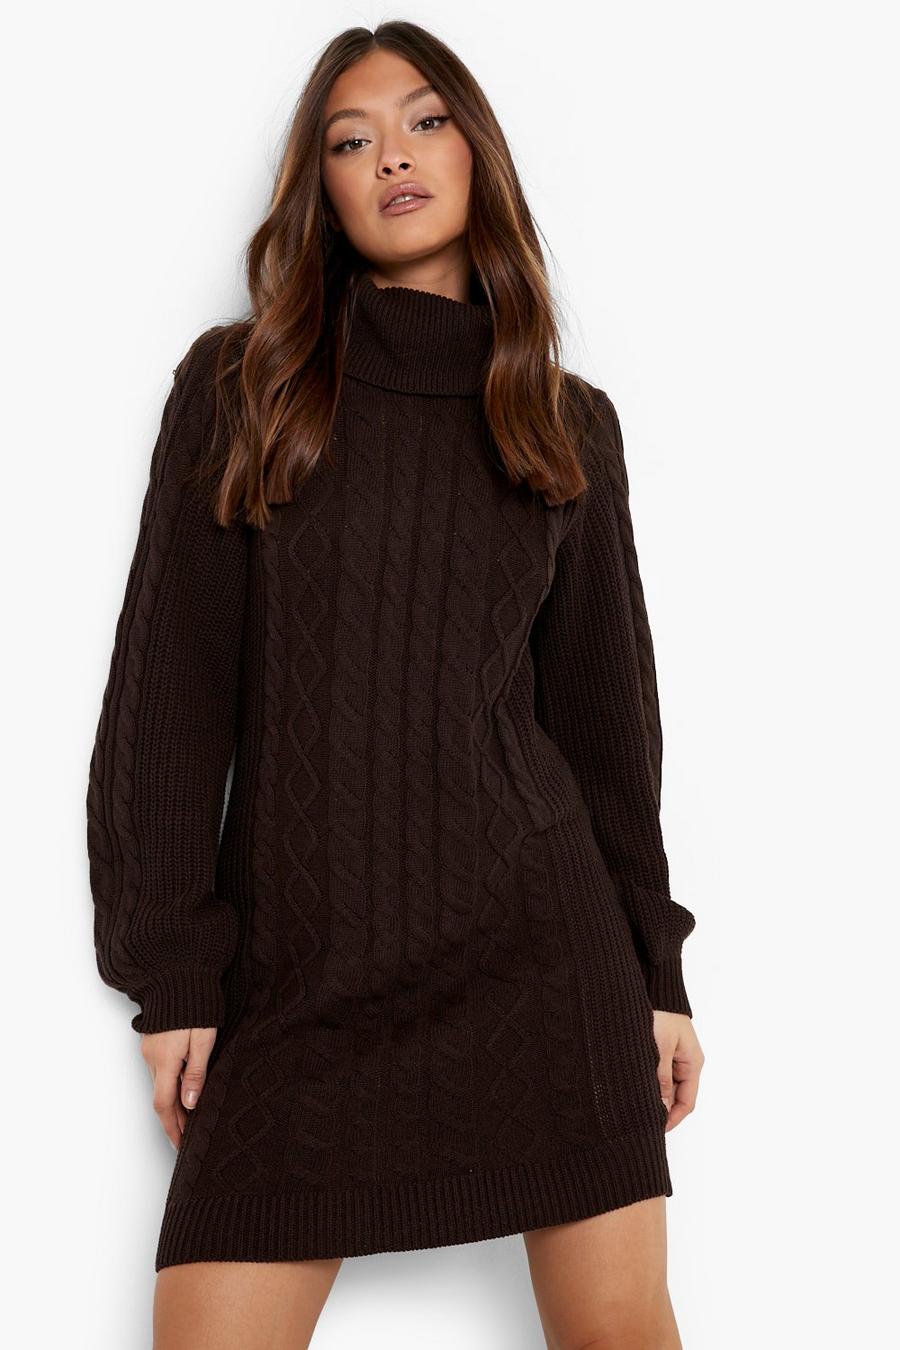 Chocolate brown Recycled Turtleneck Cable Knit Sweater Dress